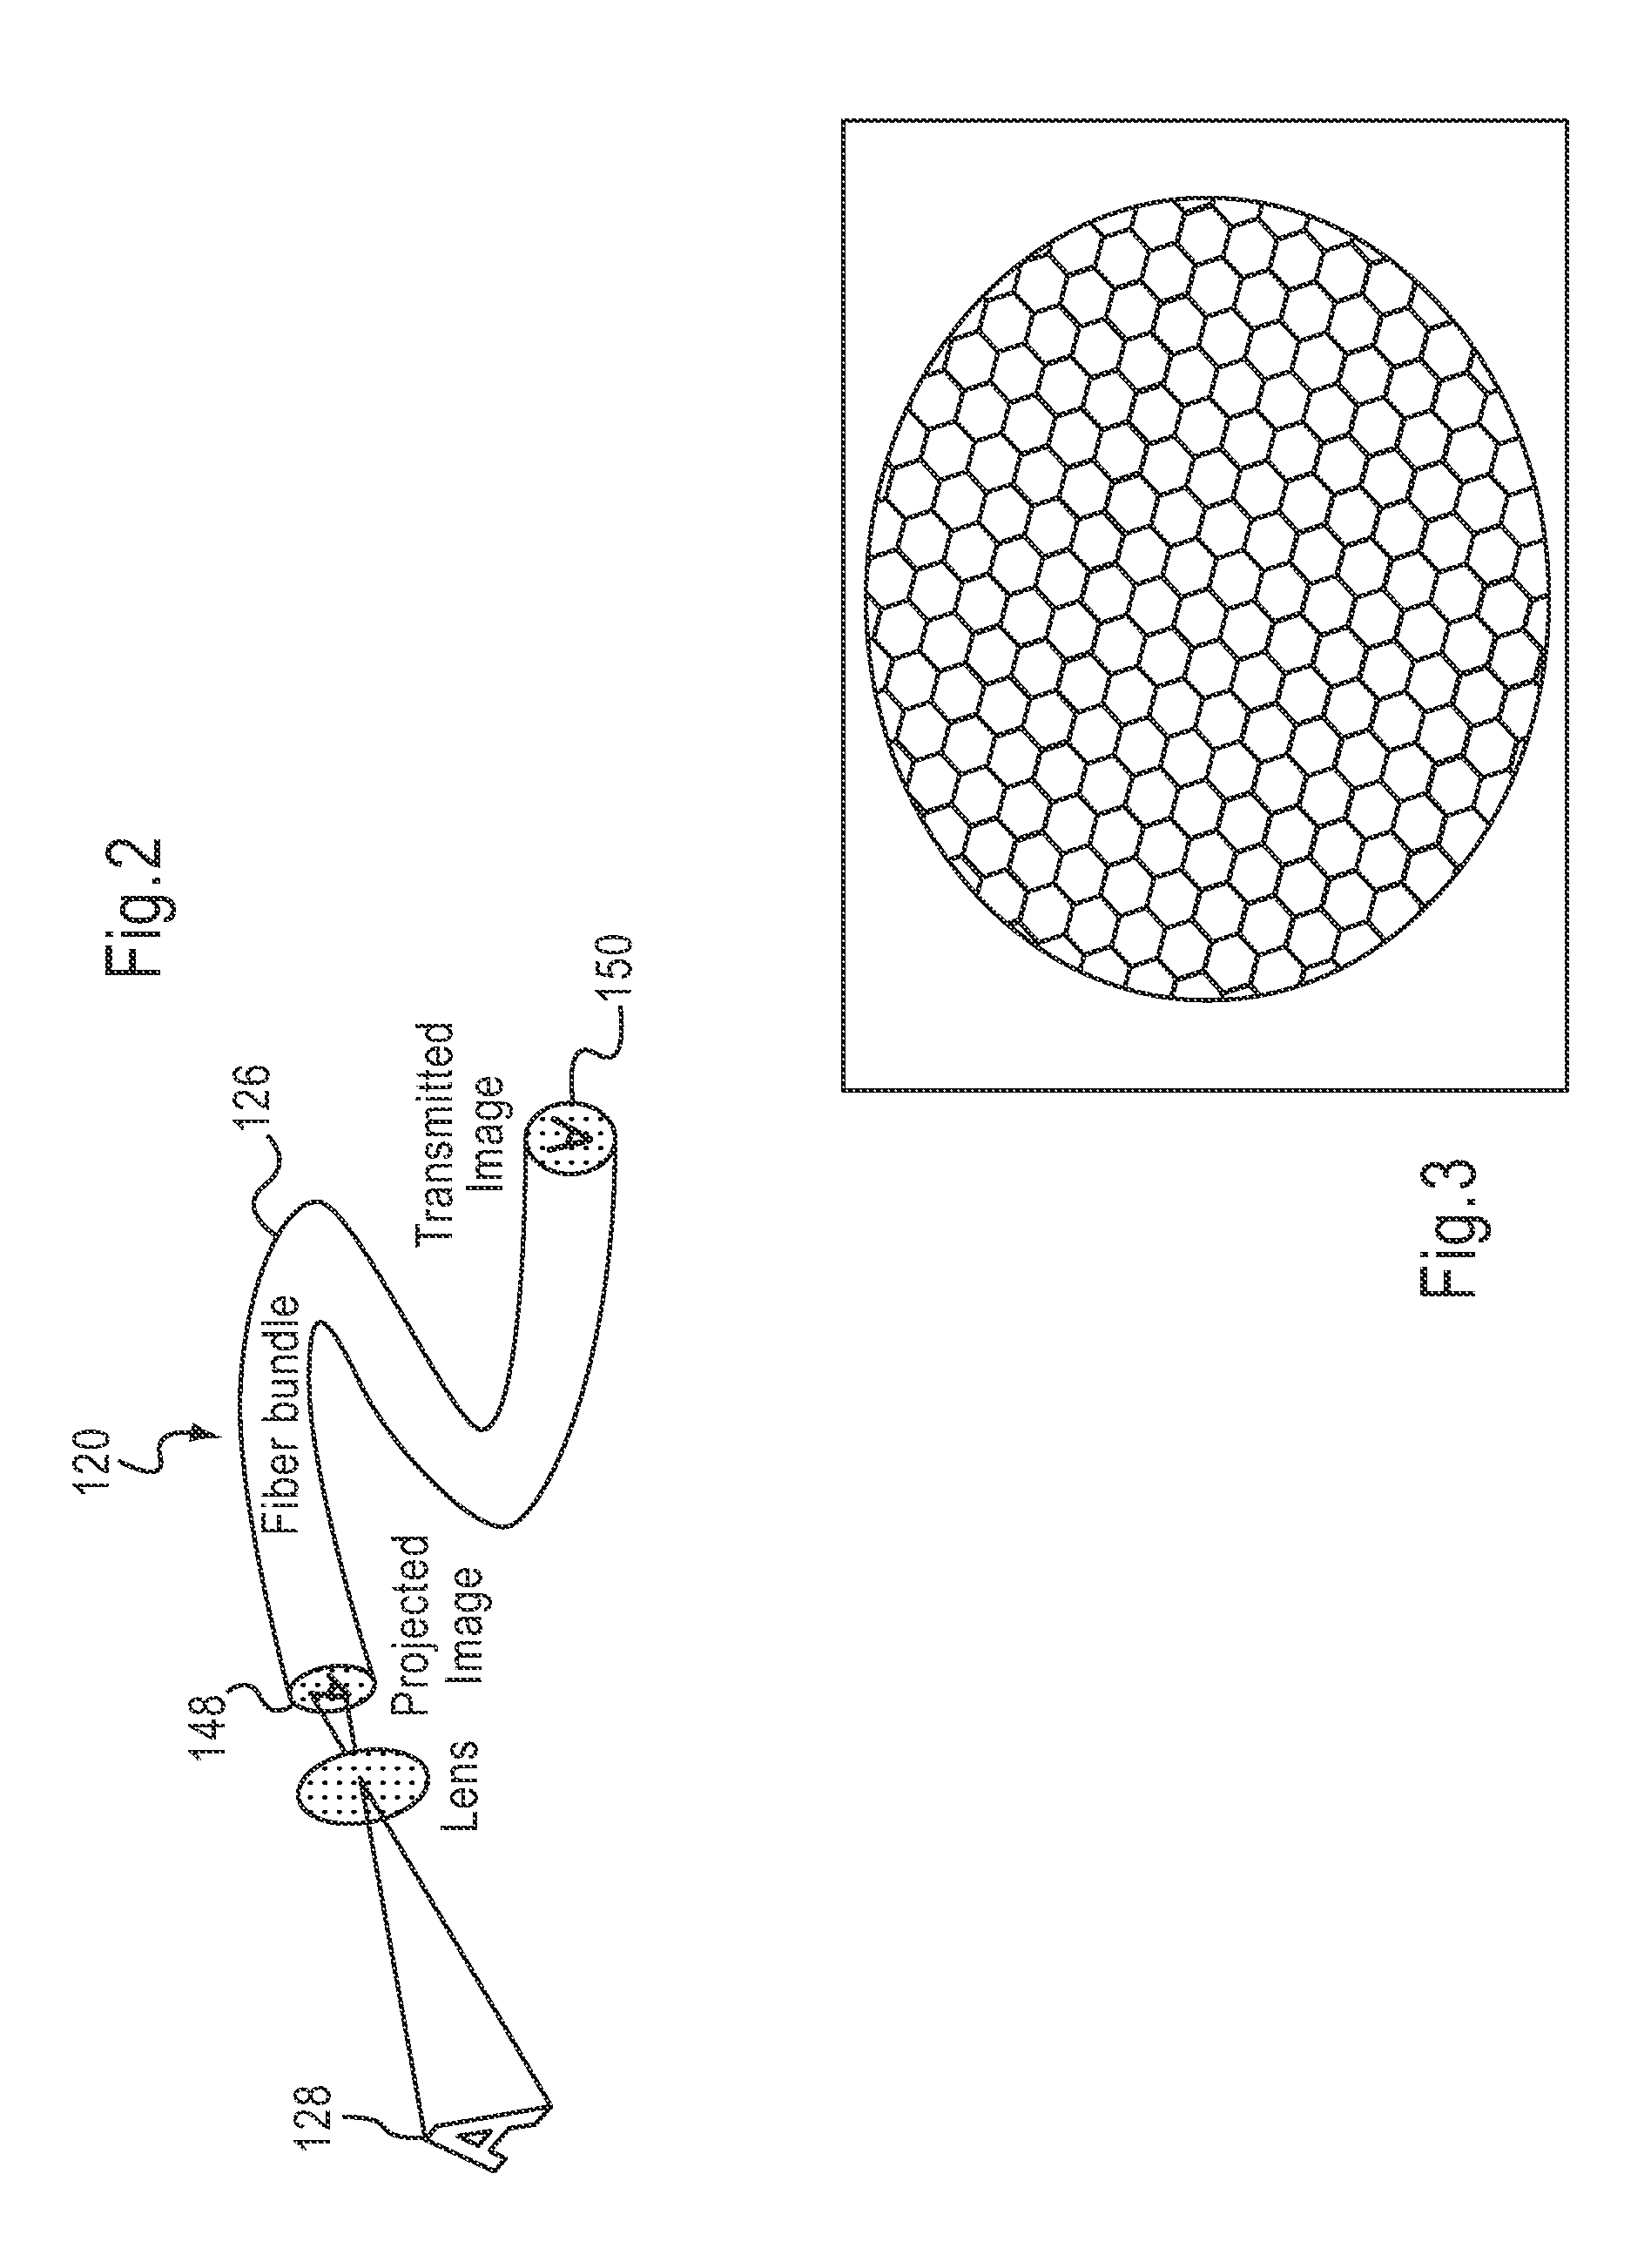 System and methods for the improvement of images generated by fiberoptic imaging bundles